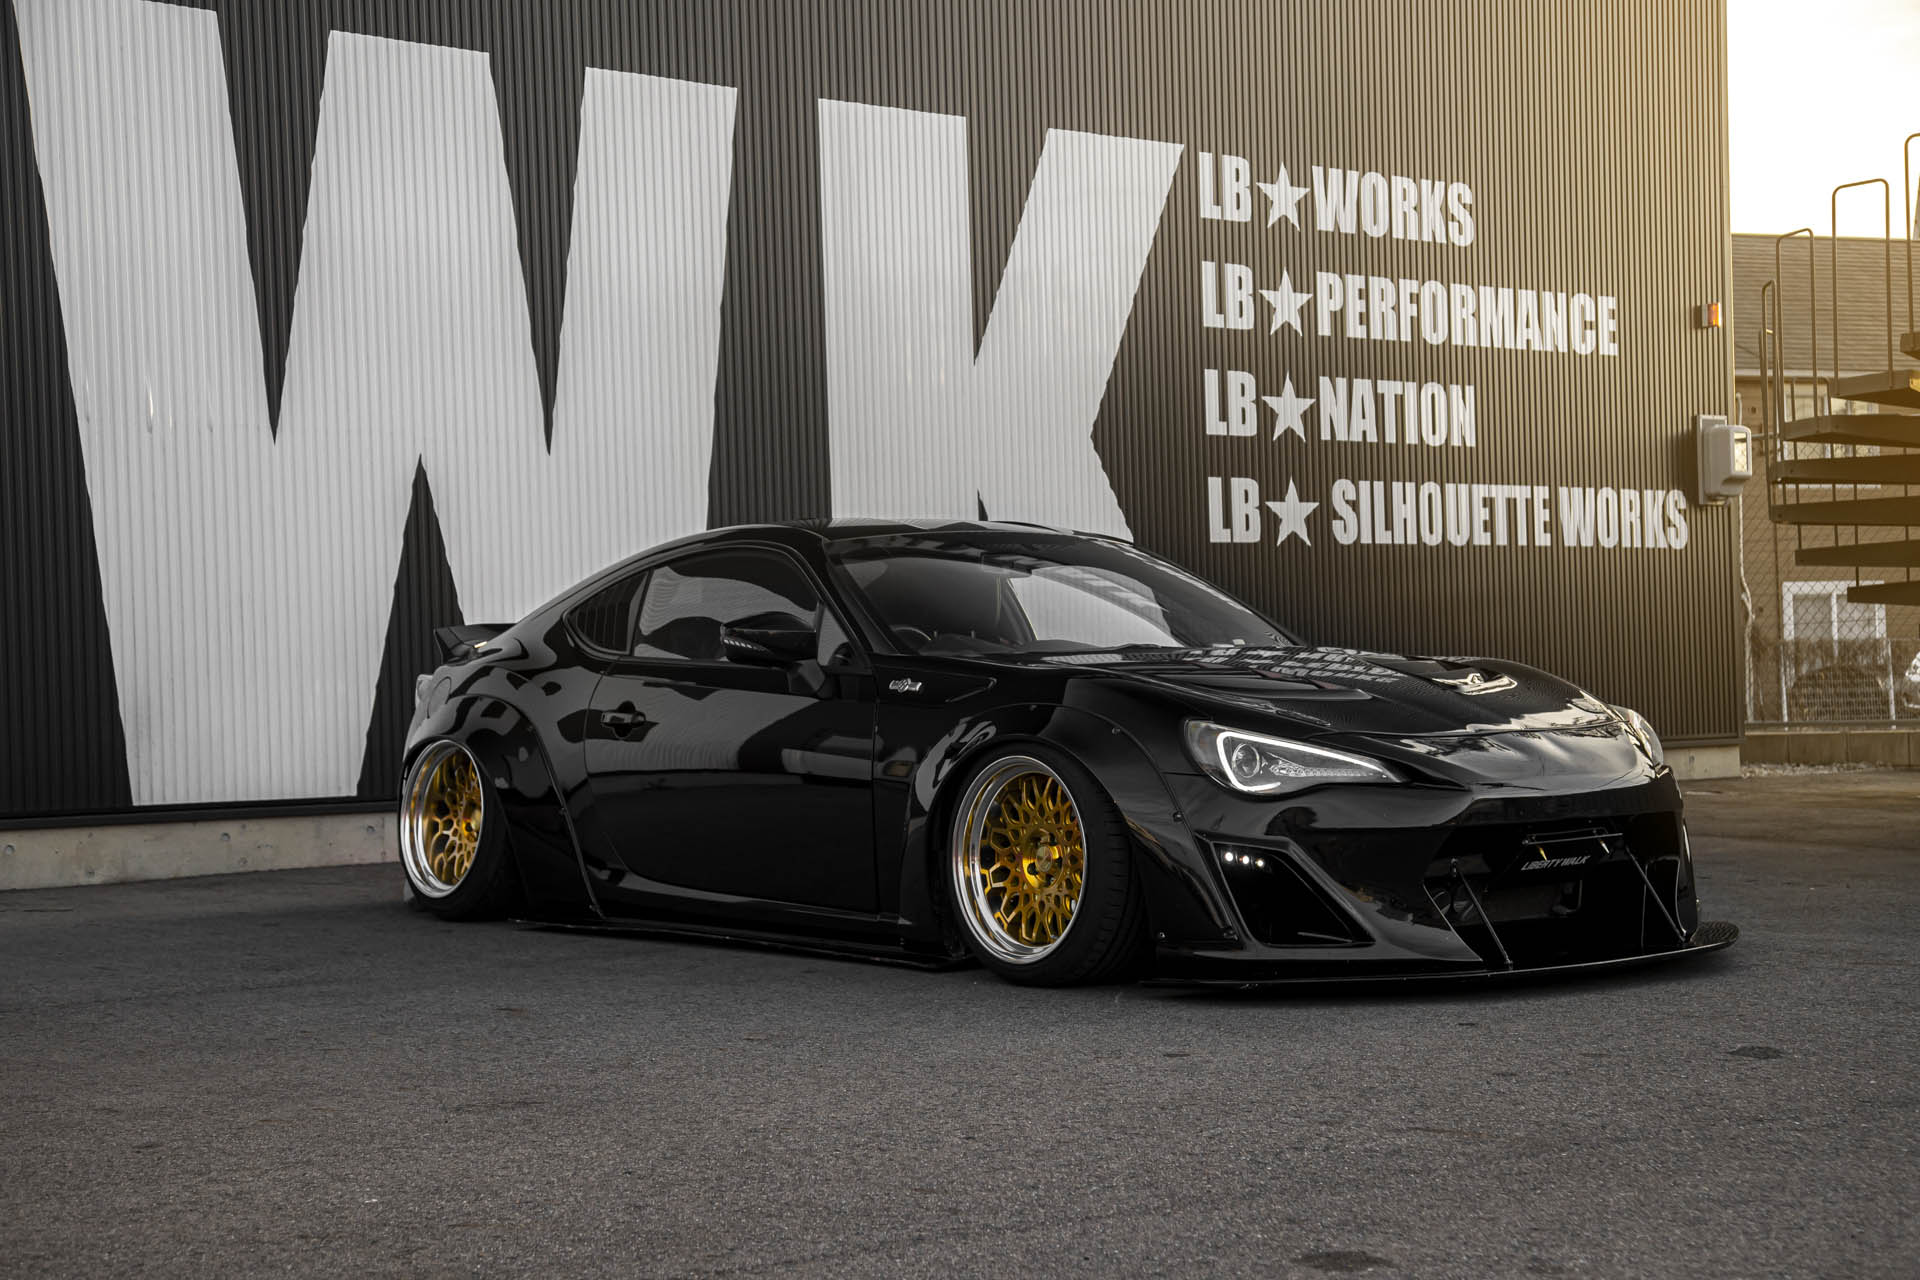 lb-nation TOYOTA 86 WORKS Full Complete - Liberty Walk 